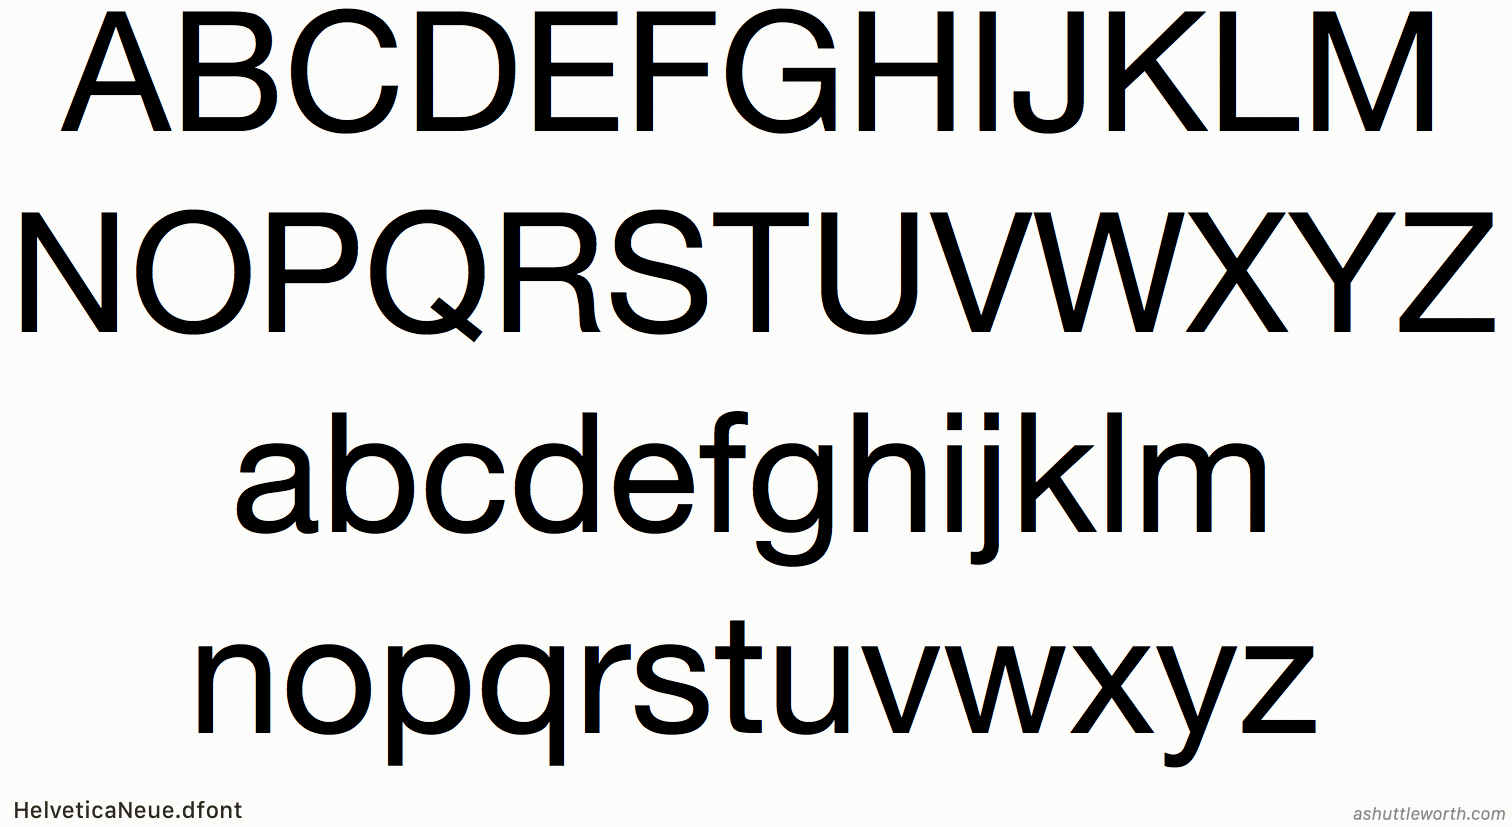 download helvetica font free for windows